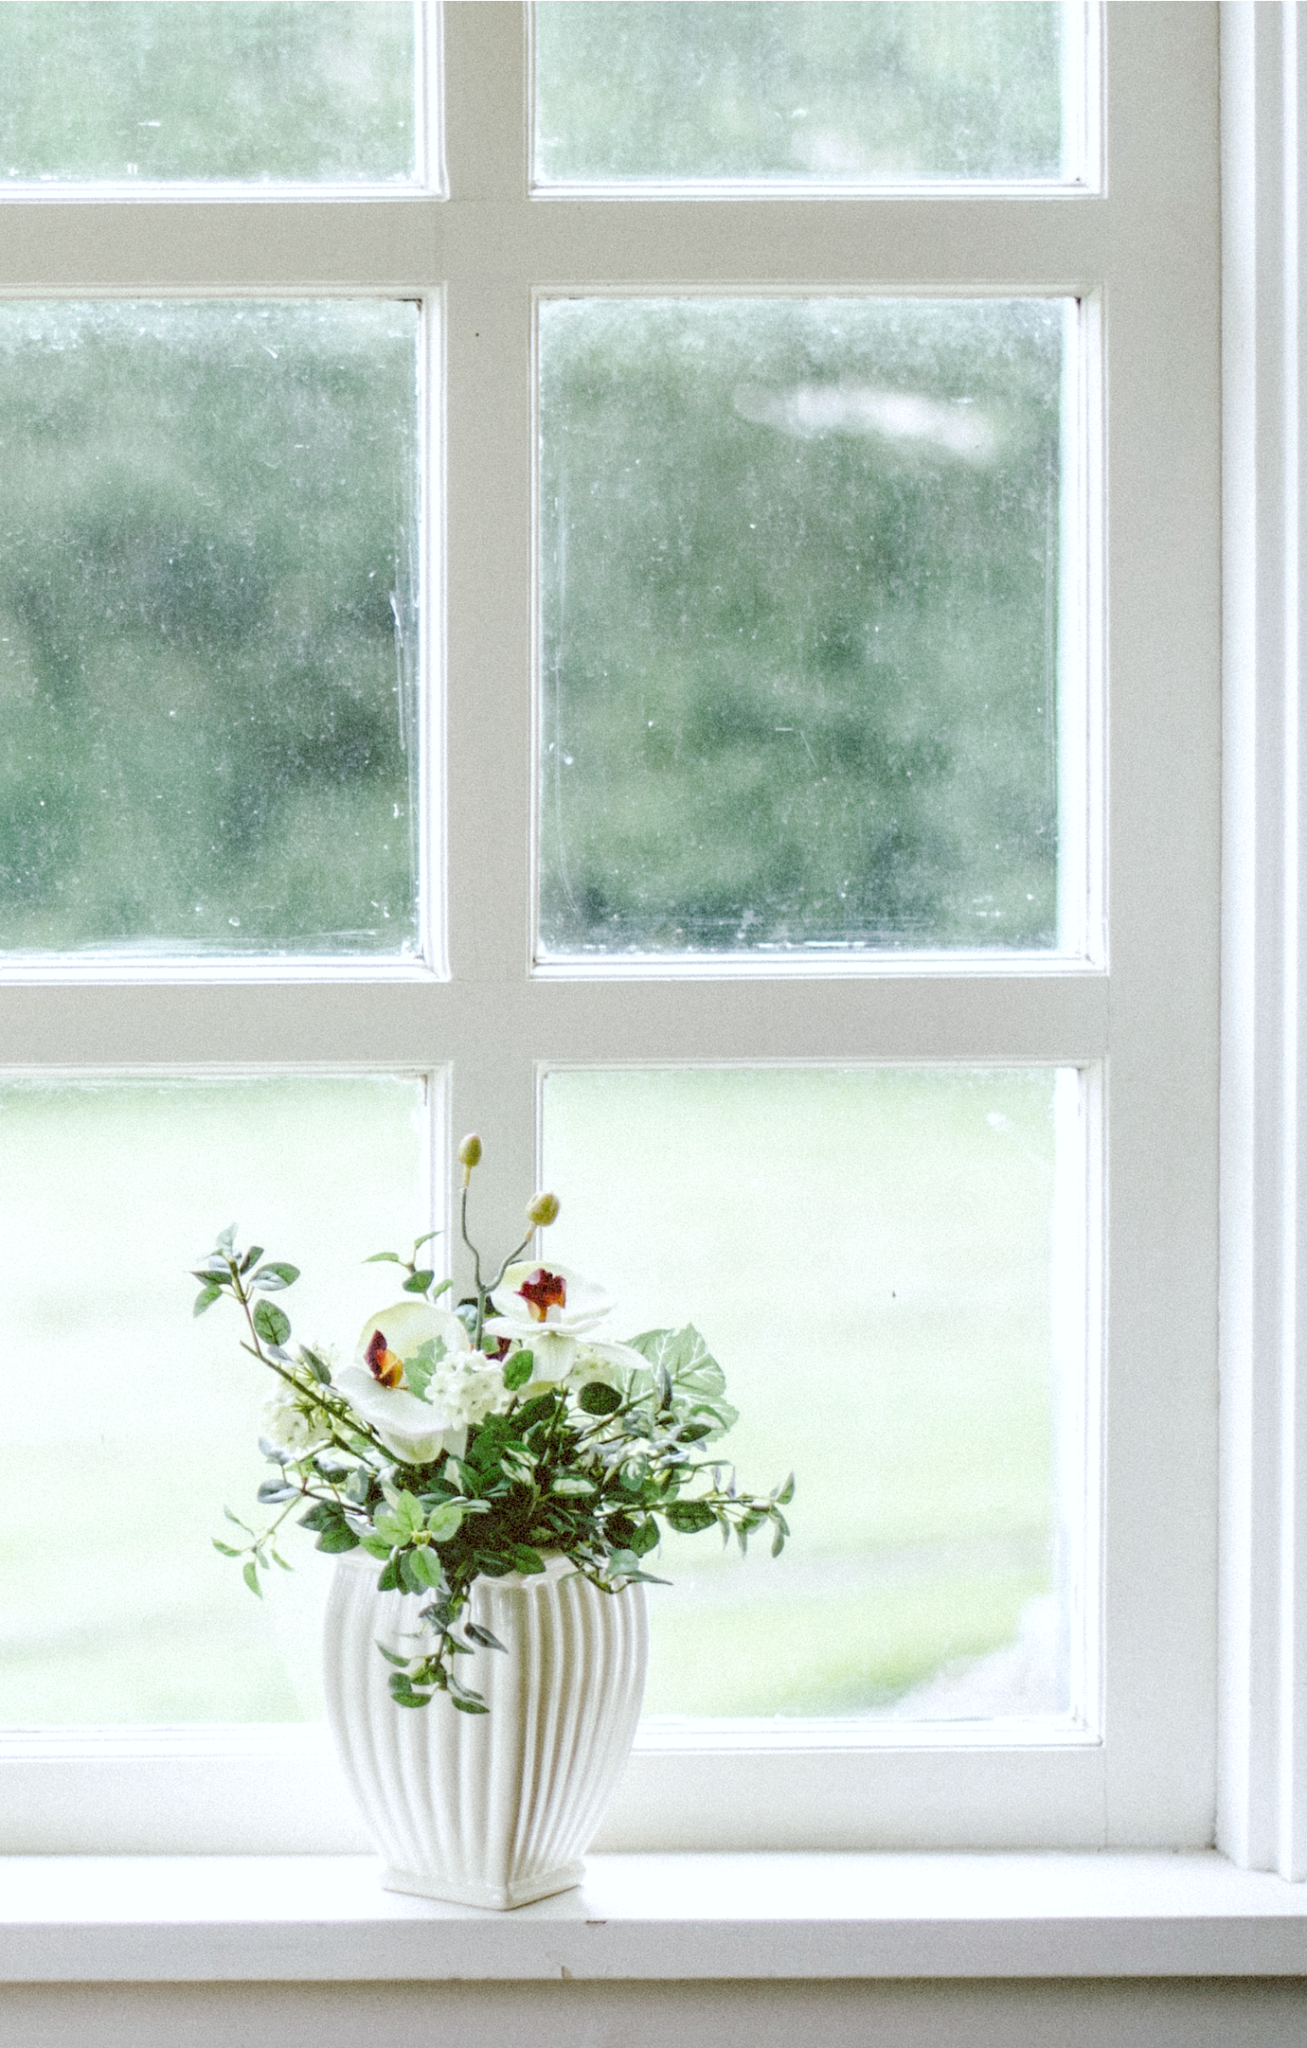 What Do Your Windows Say About Your Home?